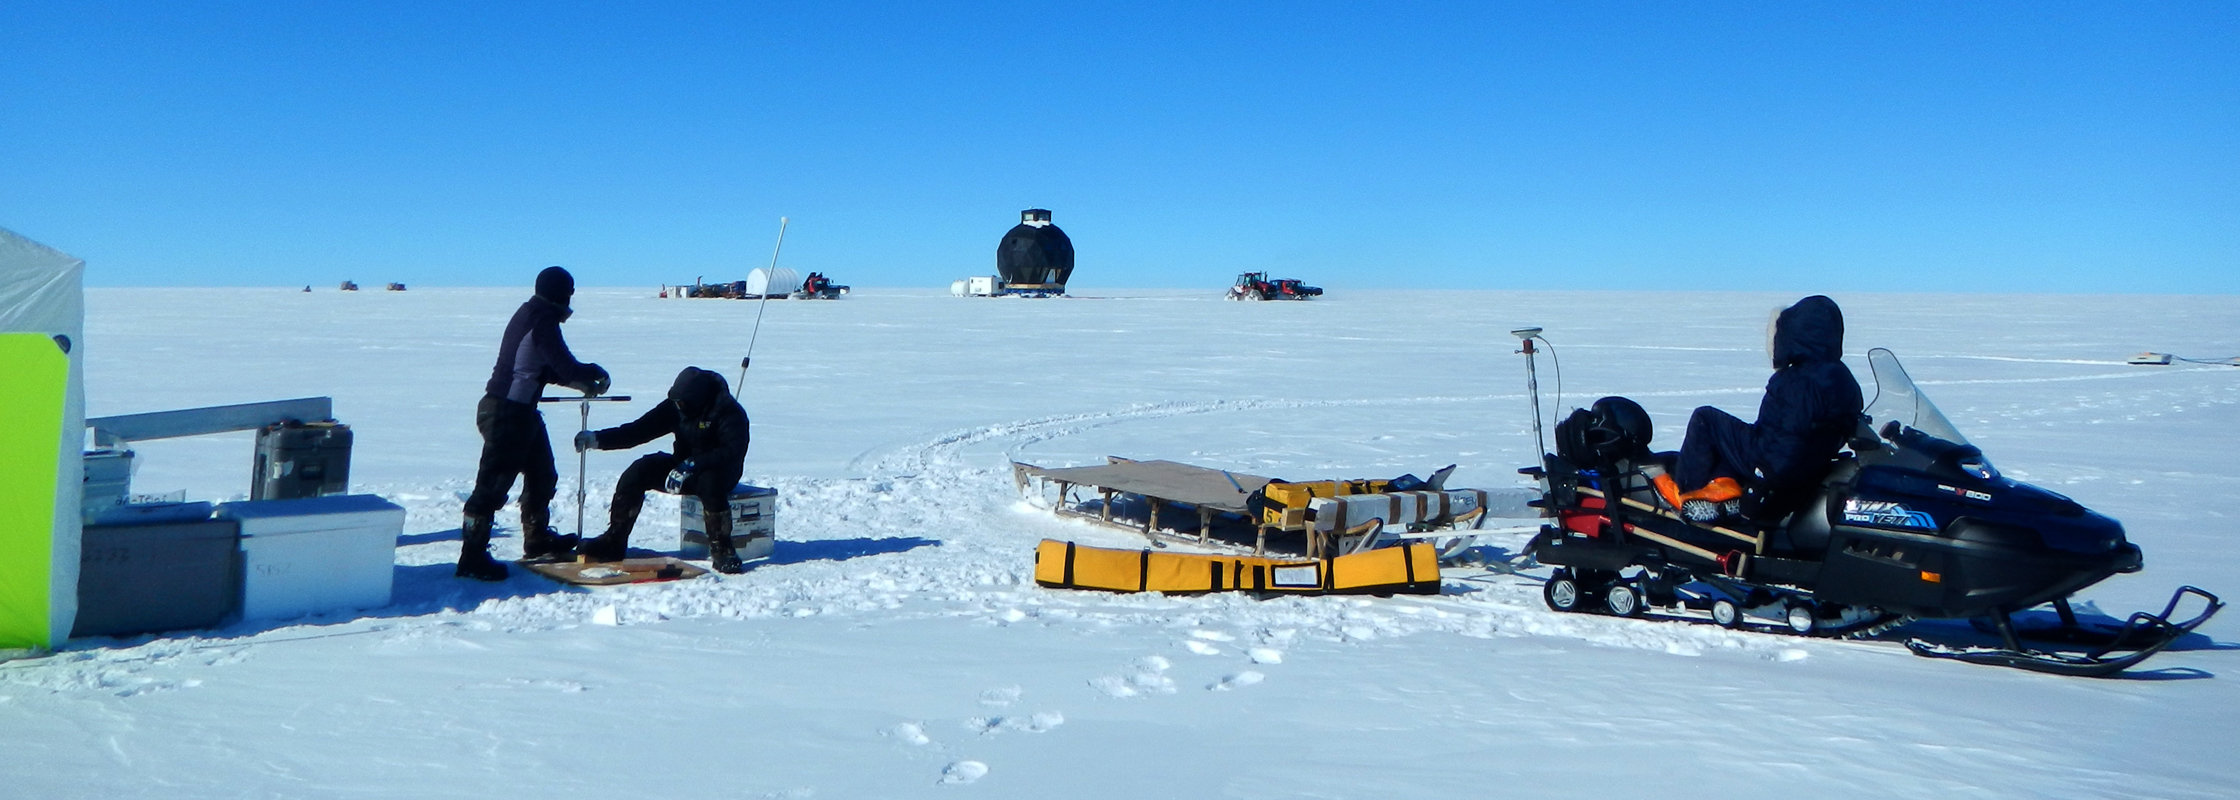 Helle and Paul are taking snow samples, while Anna is watching the traverse train go by. To the right the snowmobile with radar equipment is seen.